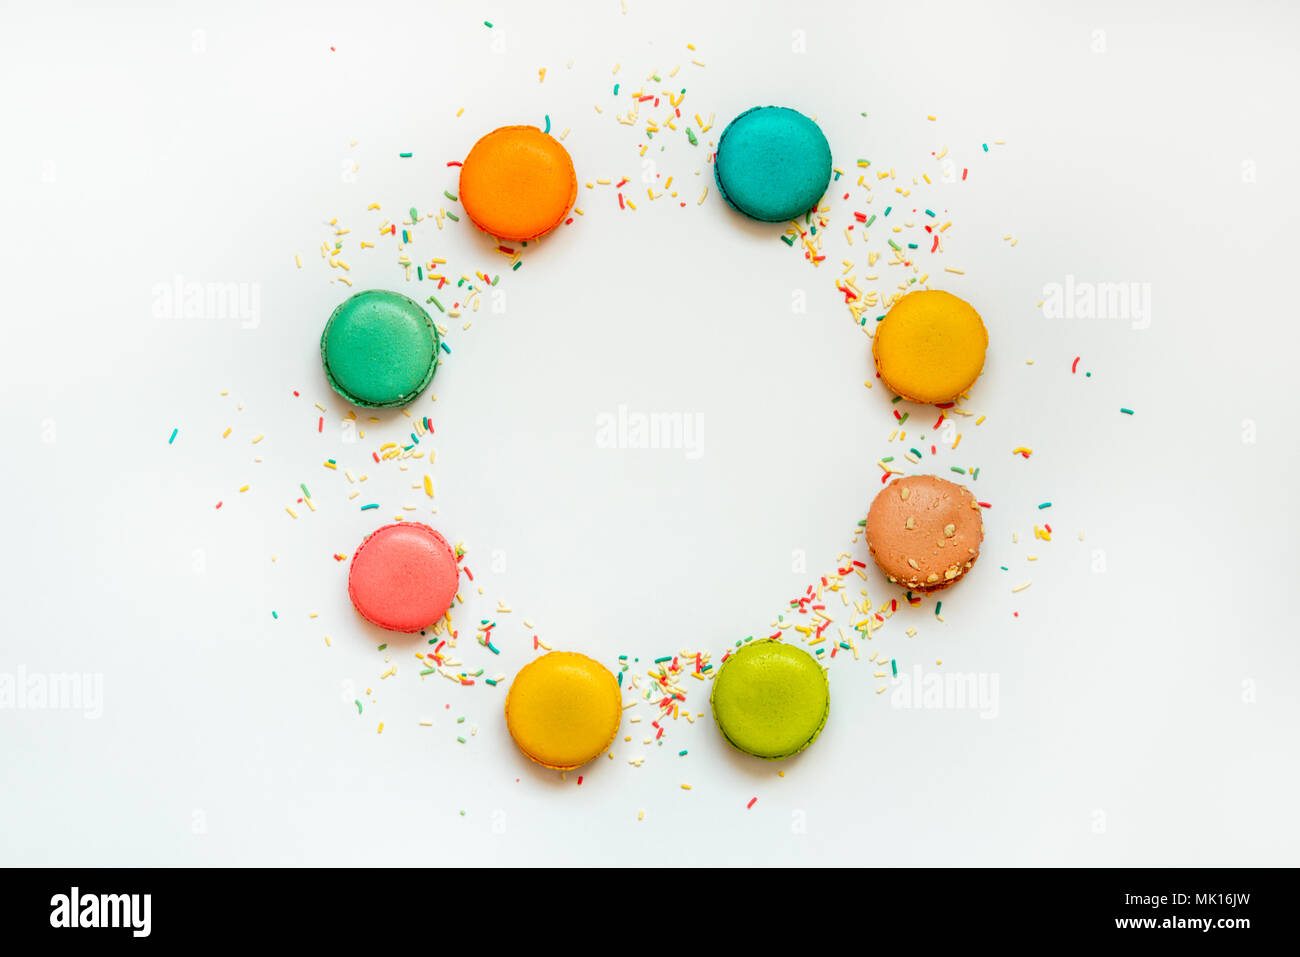 Top view of colorful macaroons and sugar sprinkles arranged in circle over white background. Copy space. Stock Photo